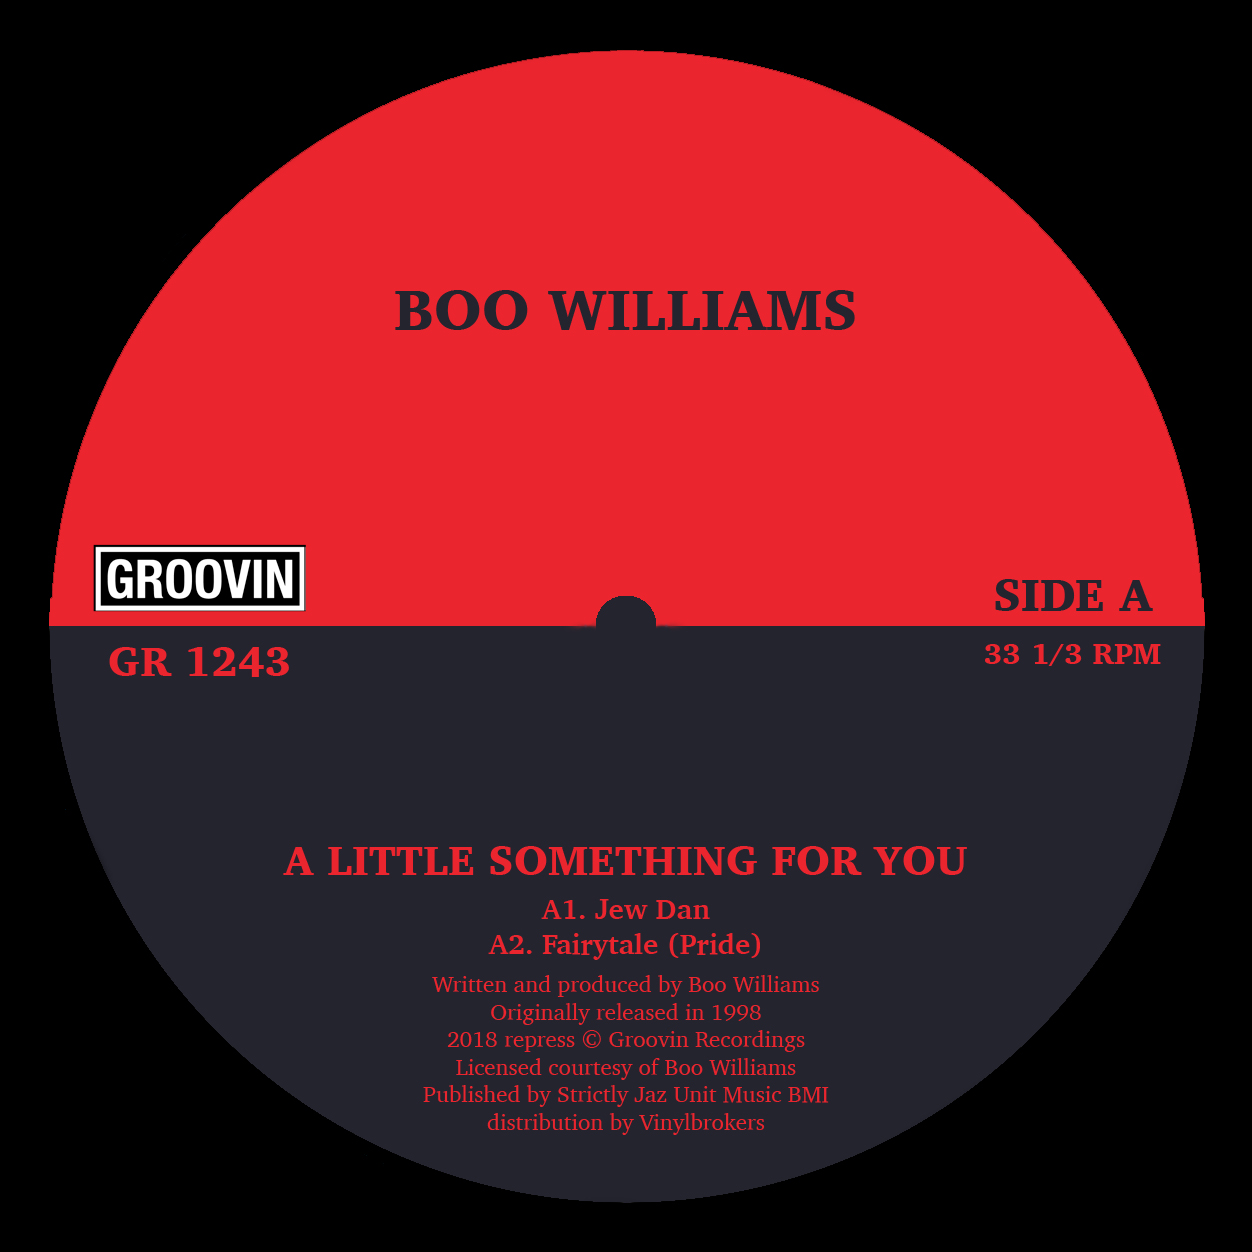 Boo Williams/A LITTLE SOMETHING EP 12"